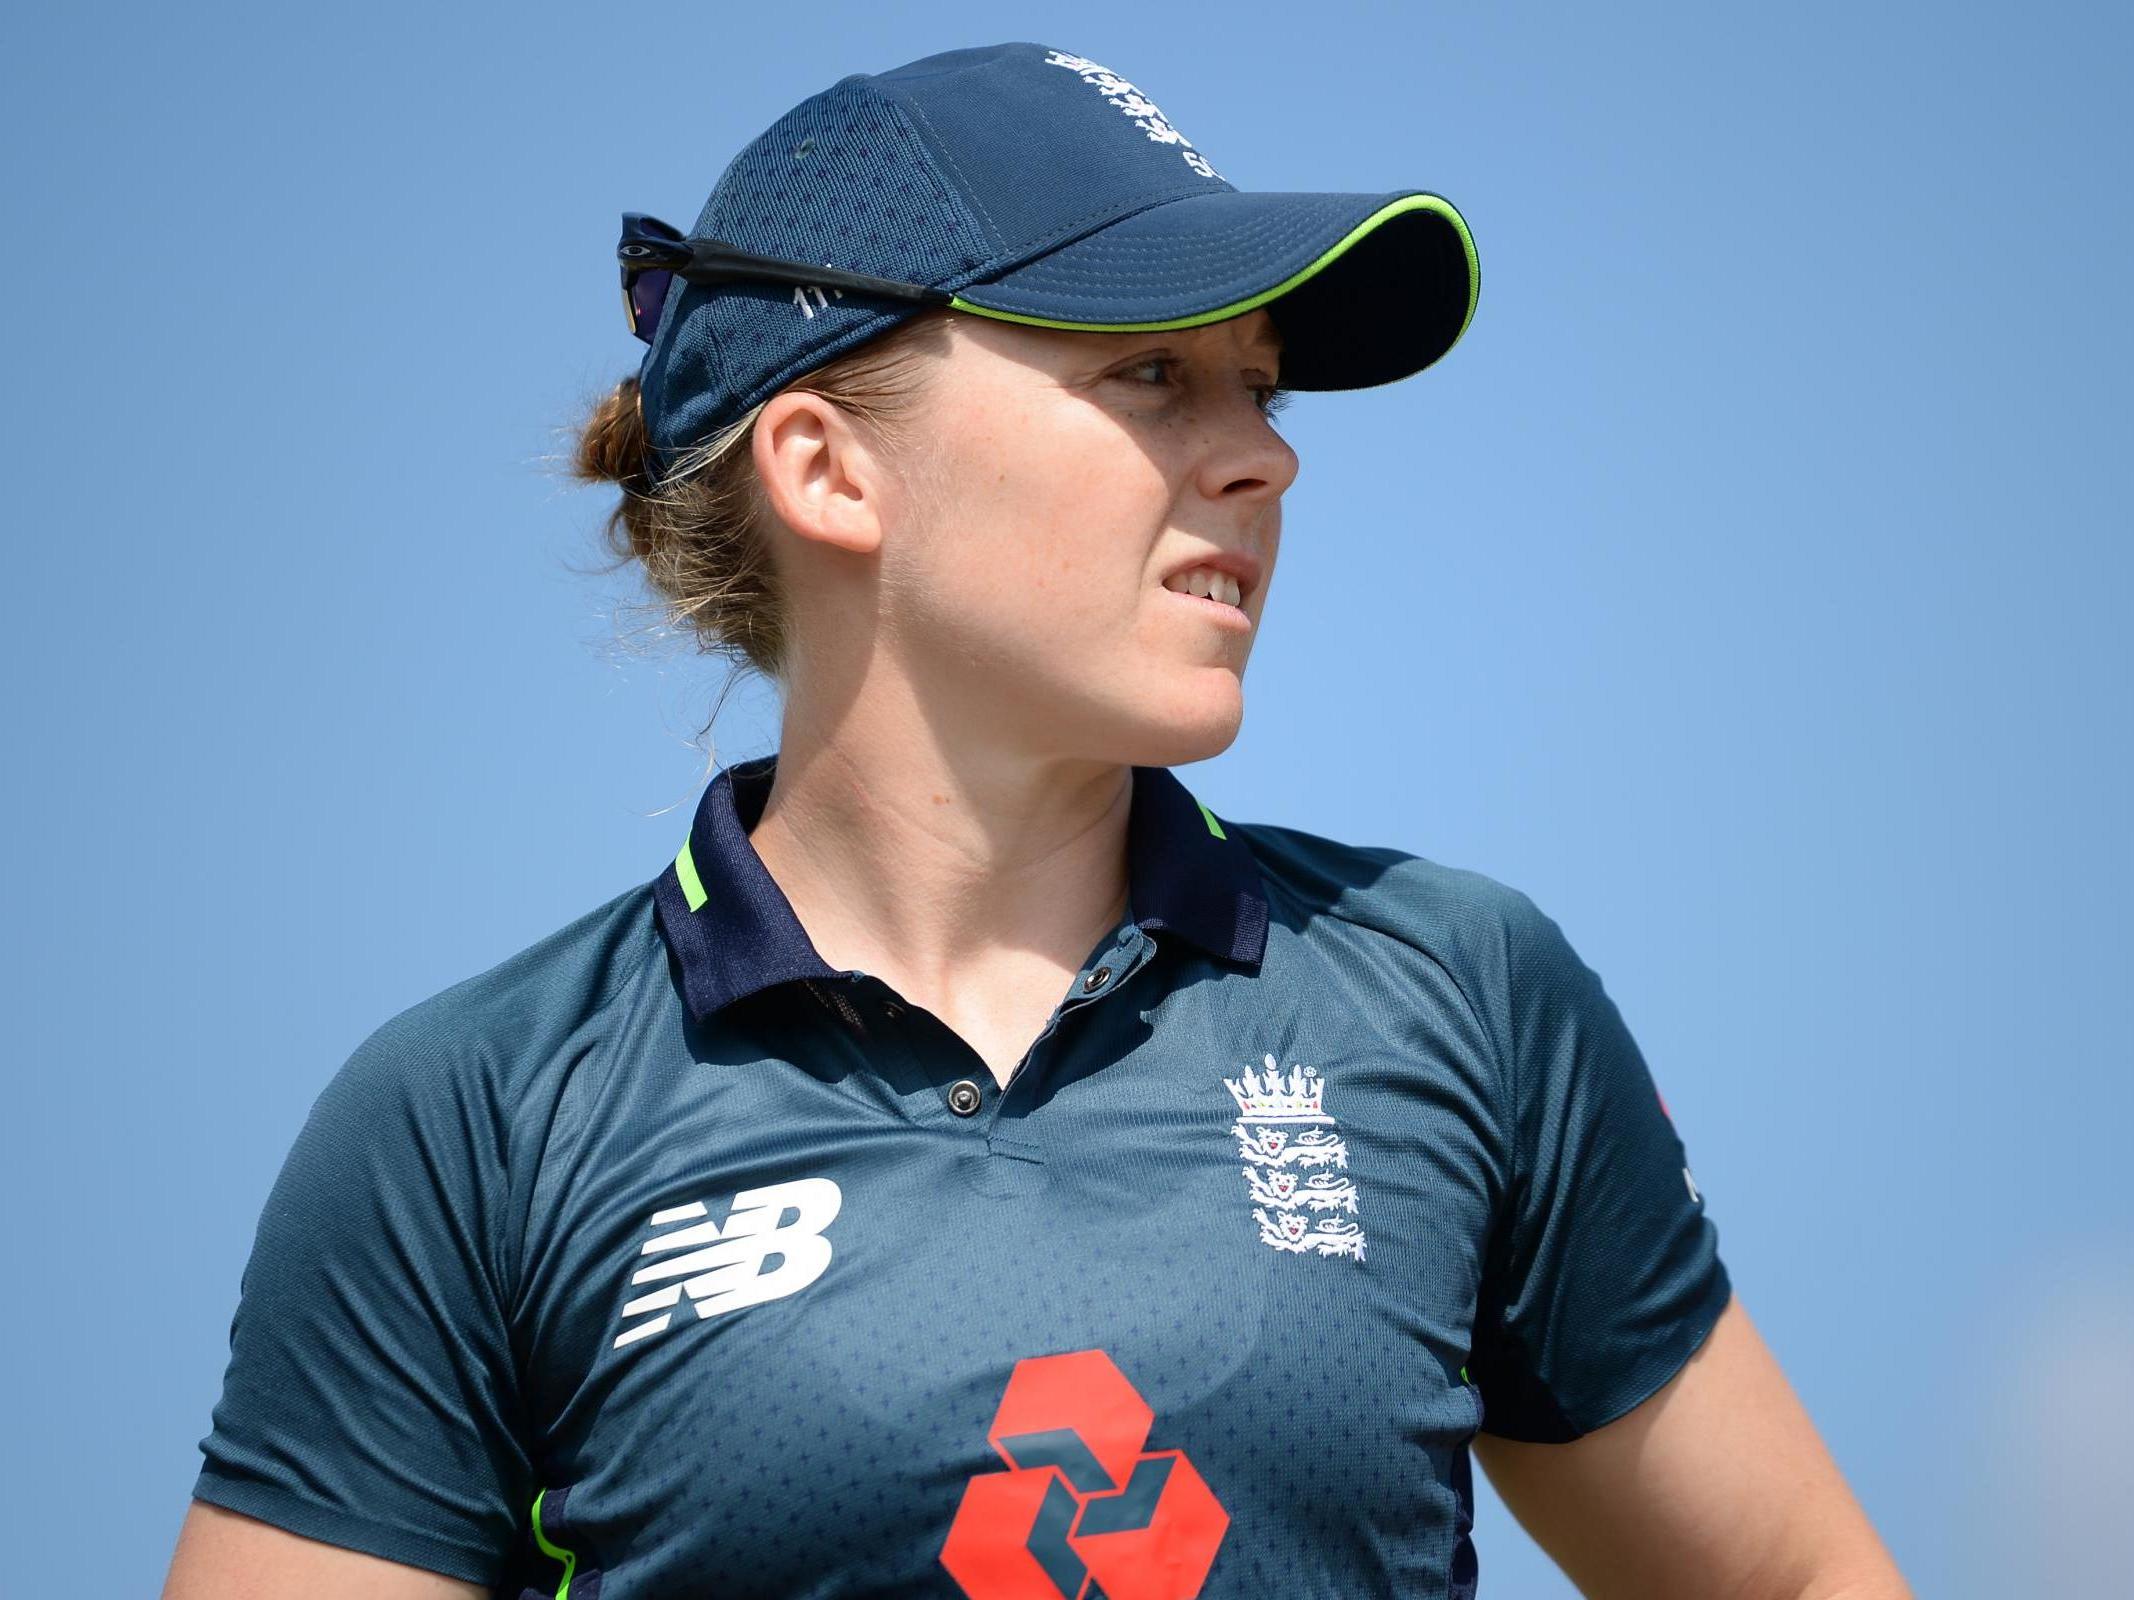 ‘I am very excited for The Hundred, the opportunity it gives the women’s game’